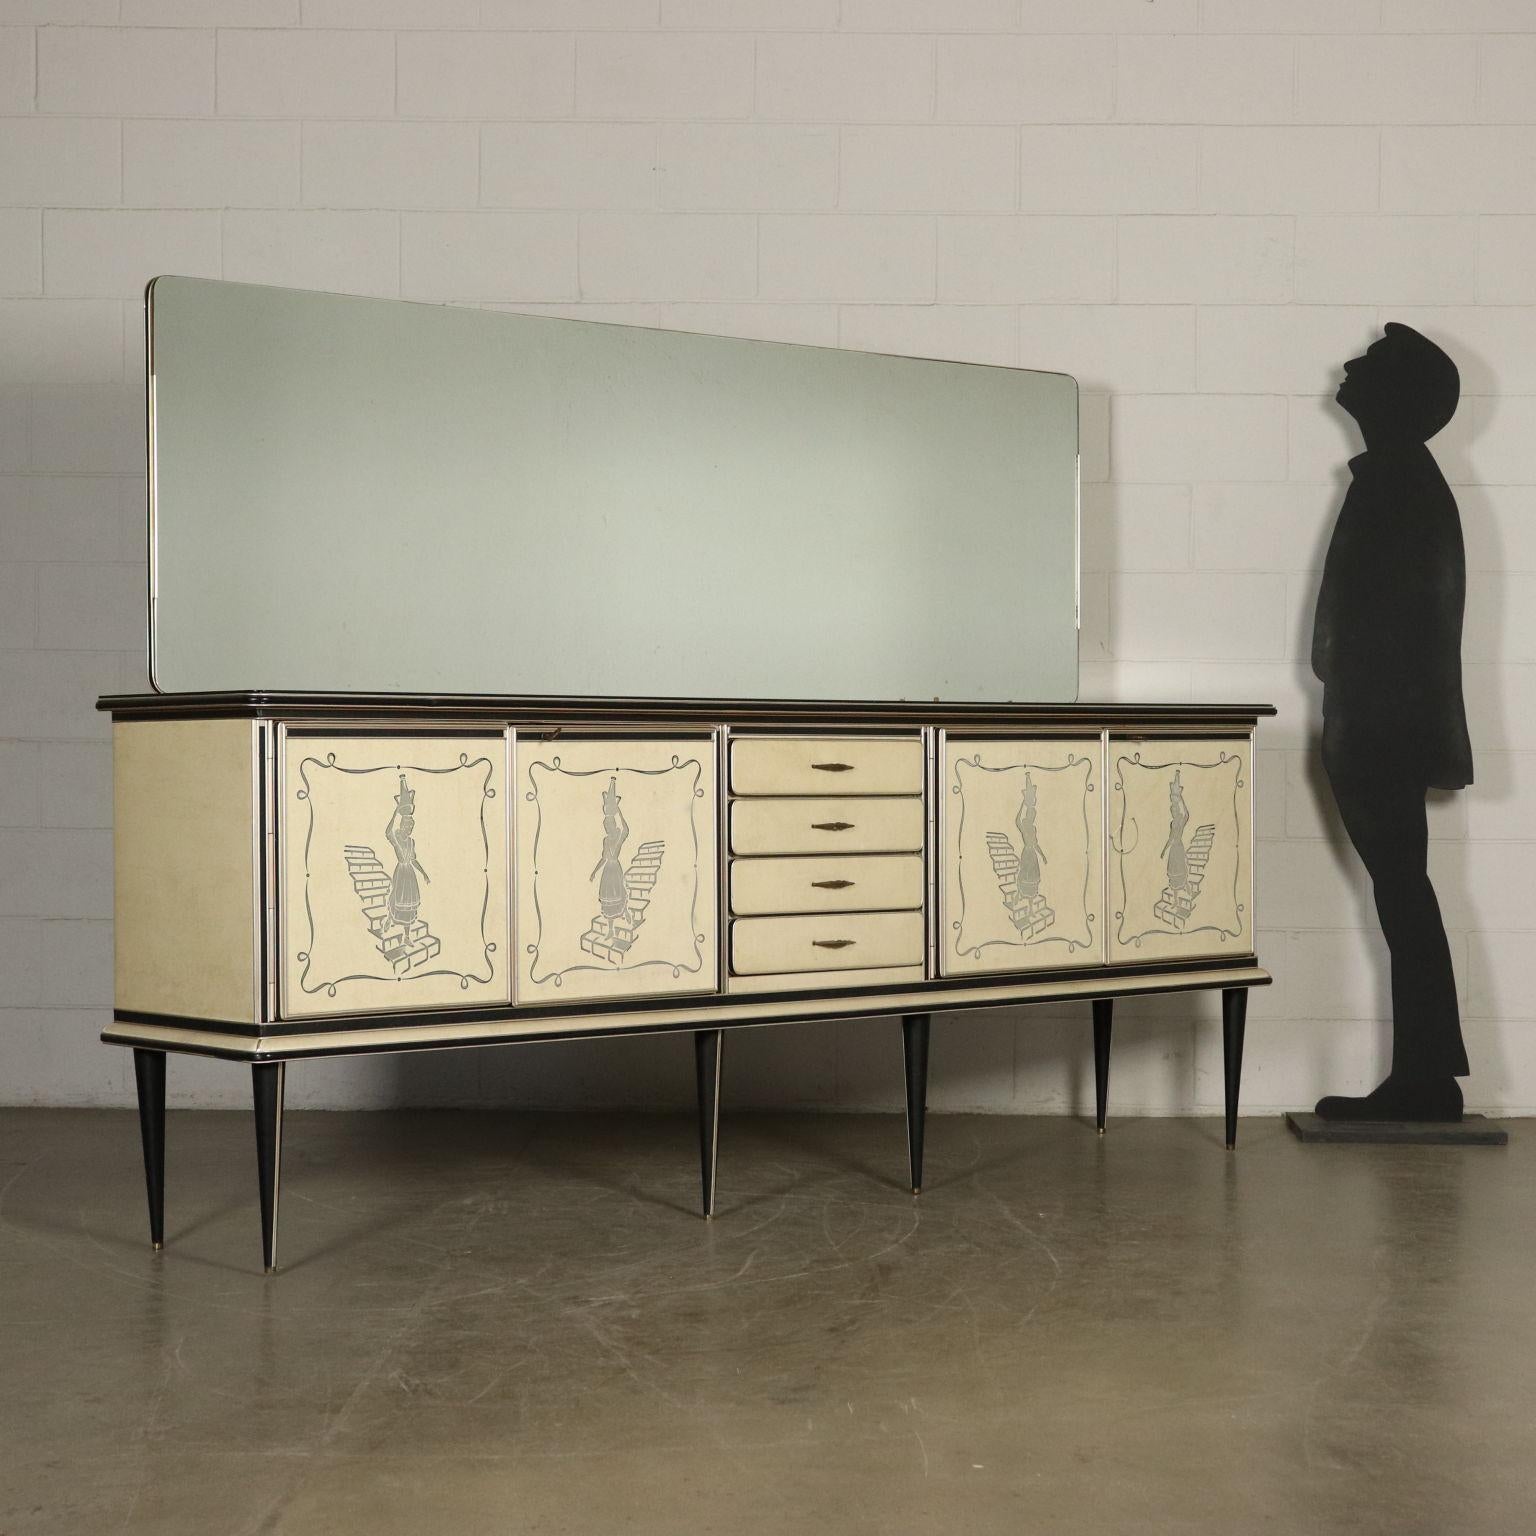 Buffet with mirror designed by Umberto Mascagni, wood covered with vinyl material, decorated glass, aluminum outlines. Manufactured in Italy, 1950s.